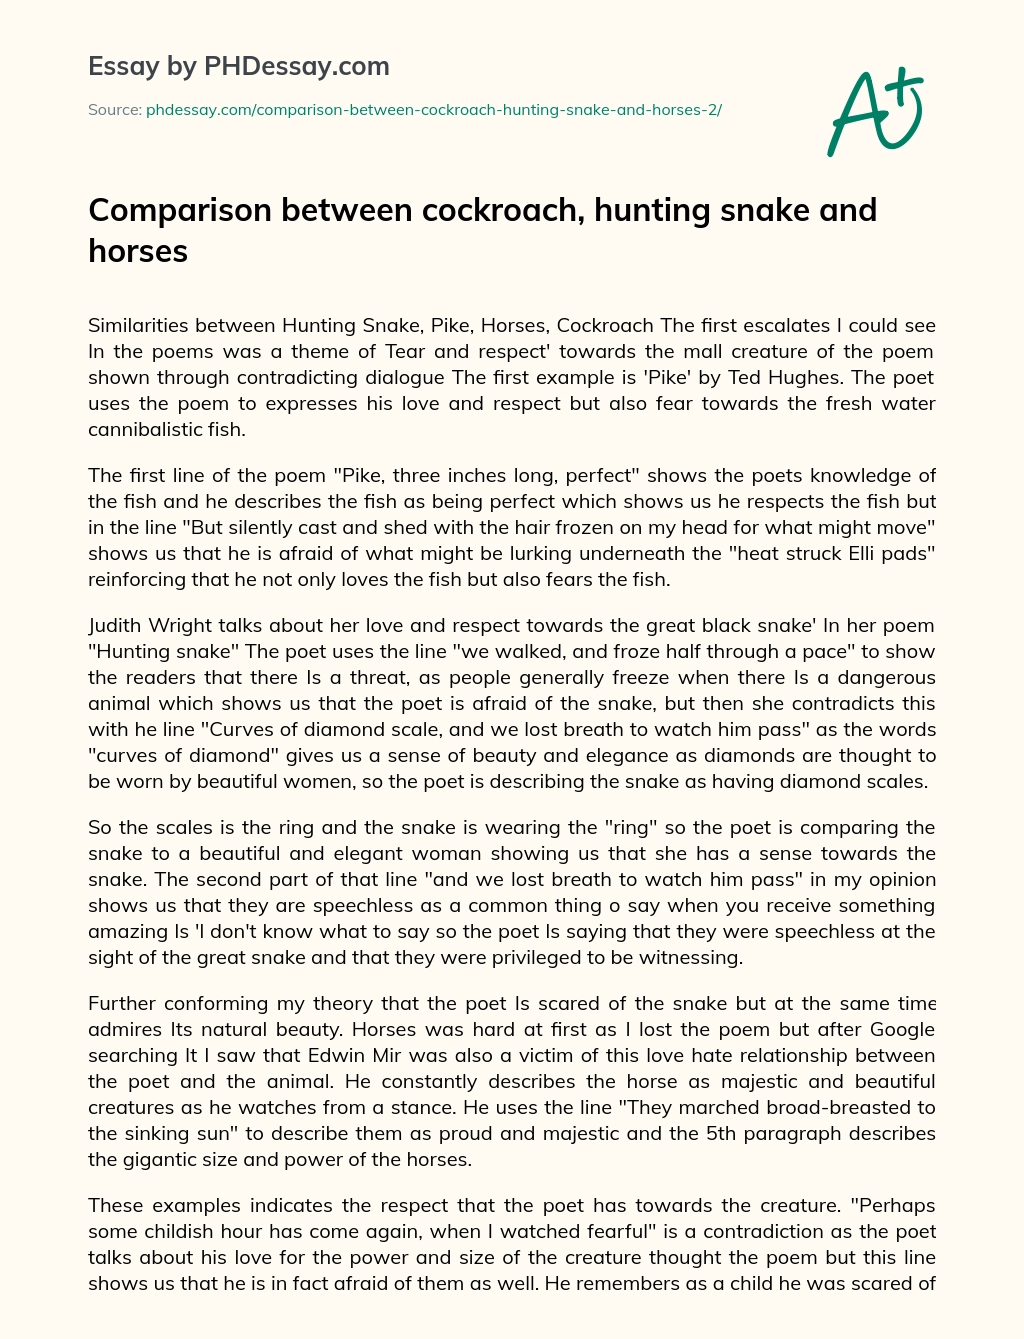 Comparison between cockroach, hunting snake and horses essay